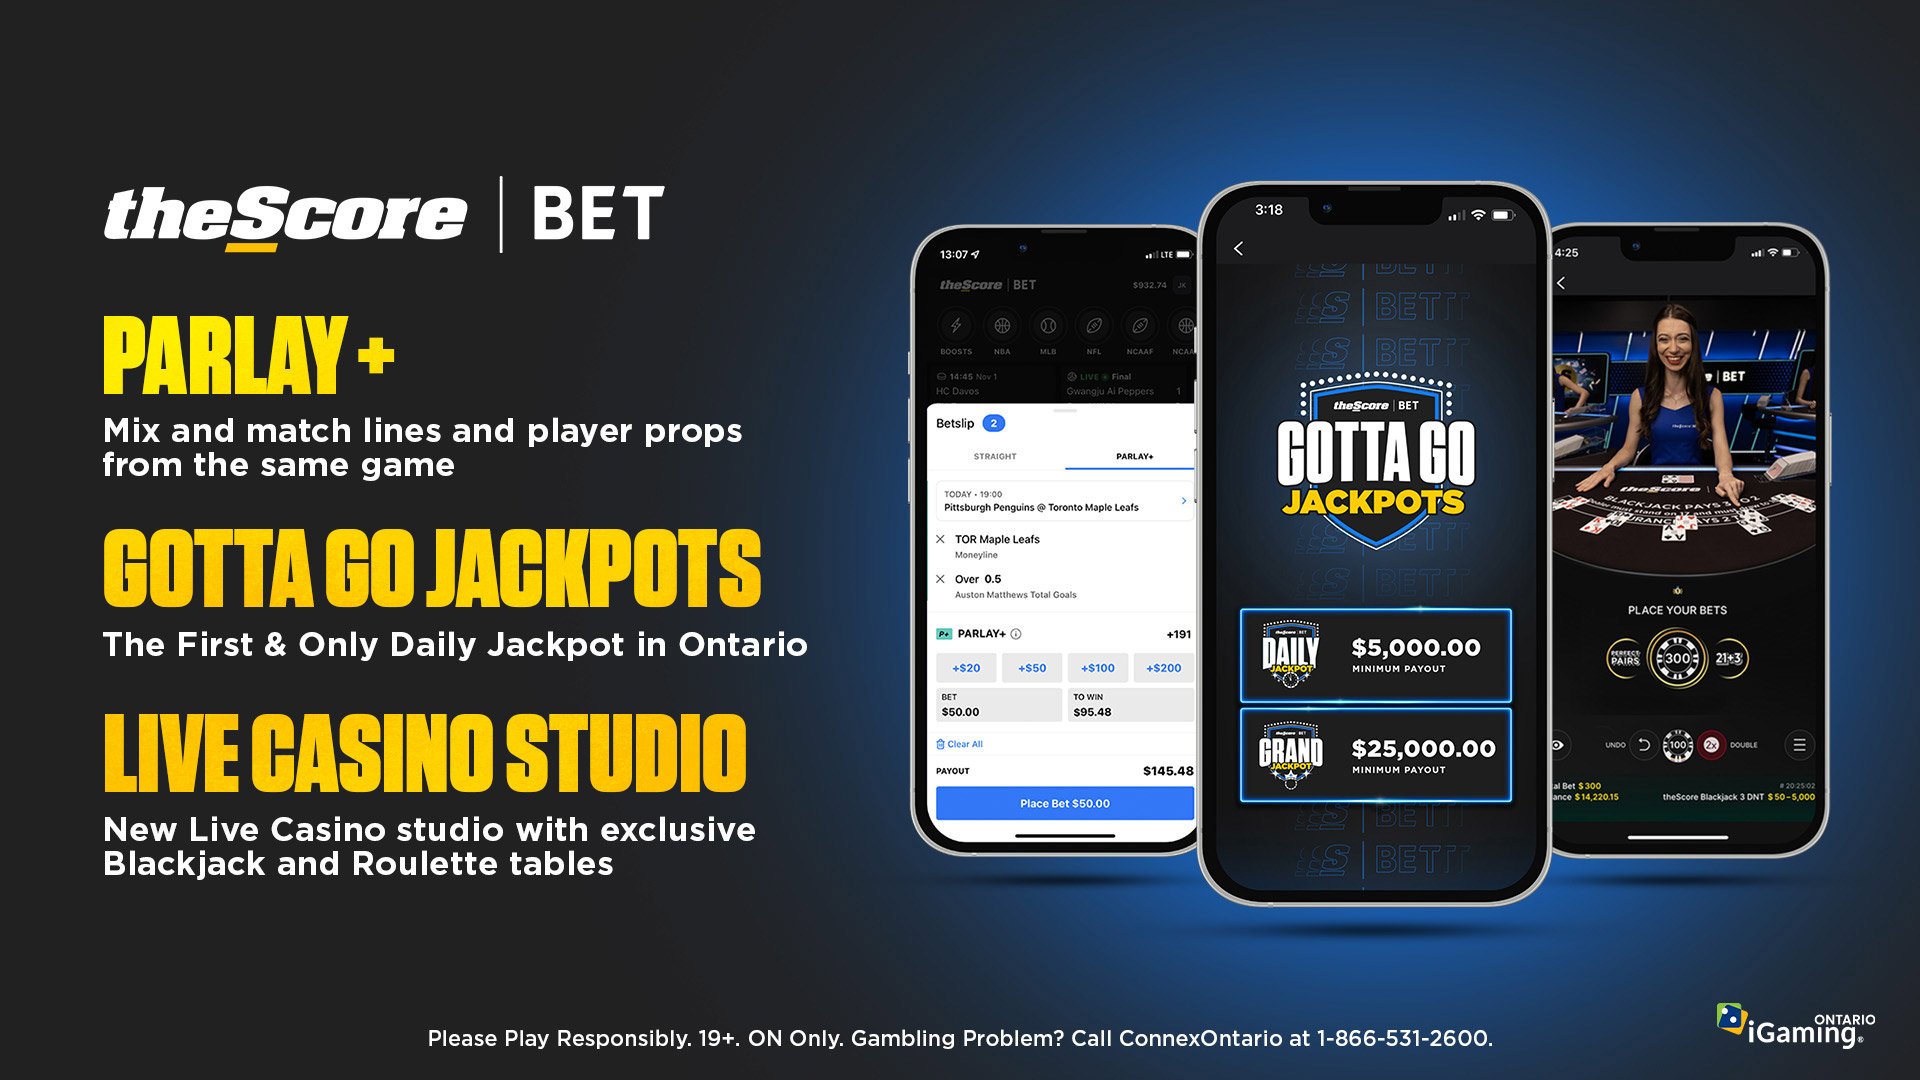 theScore Bet expands mobile sportsbook and casino offering in Ontario with new features and games